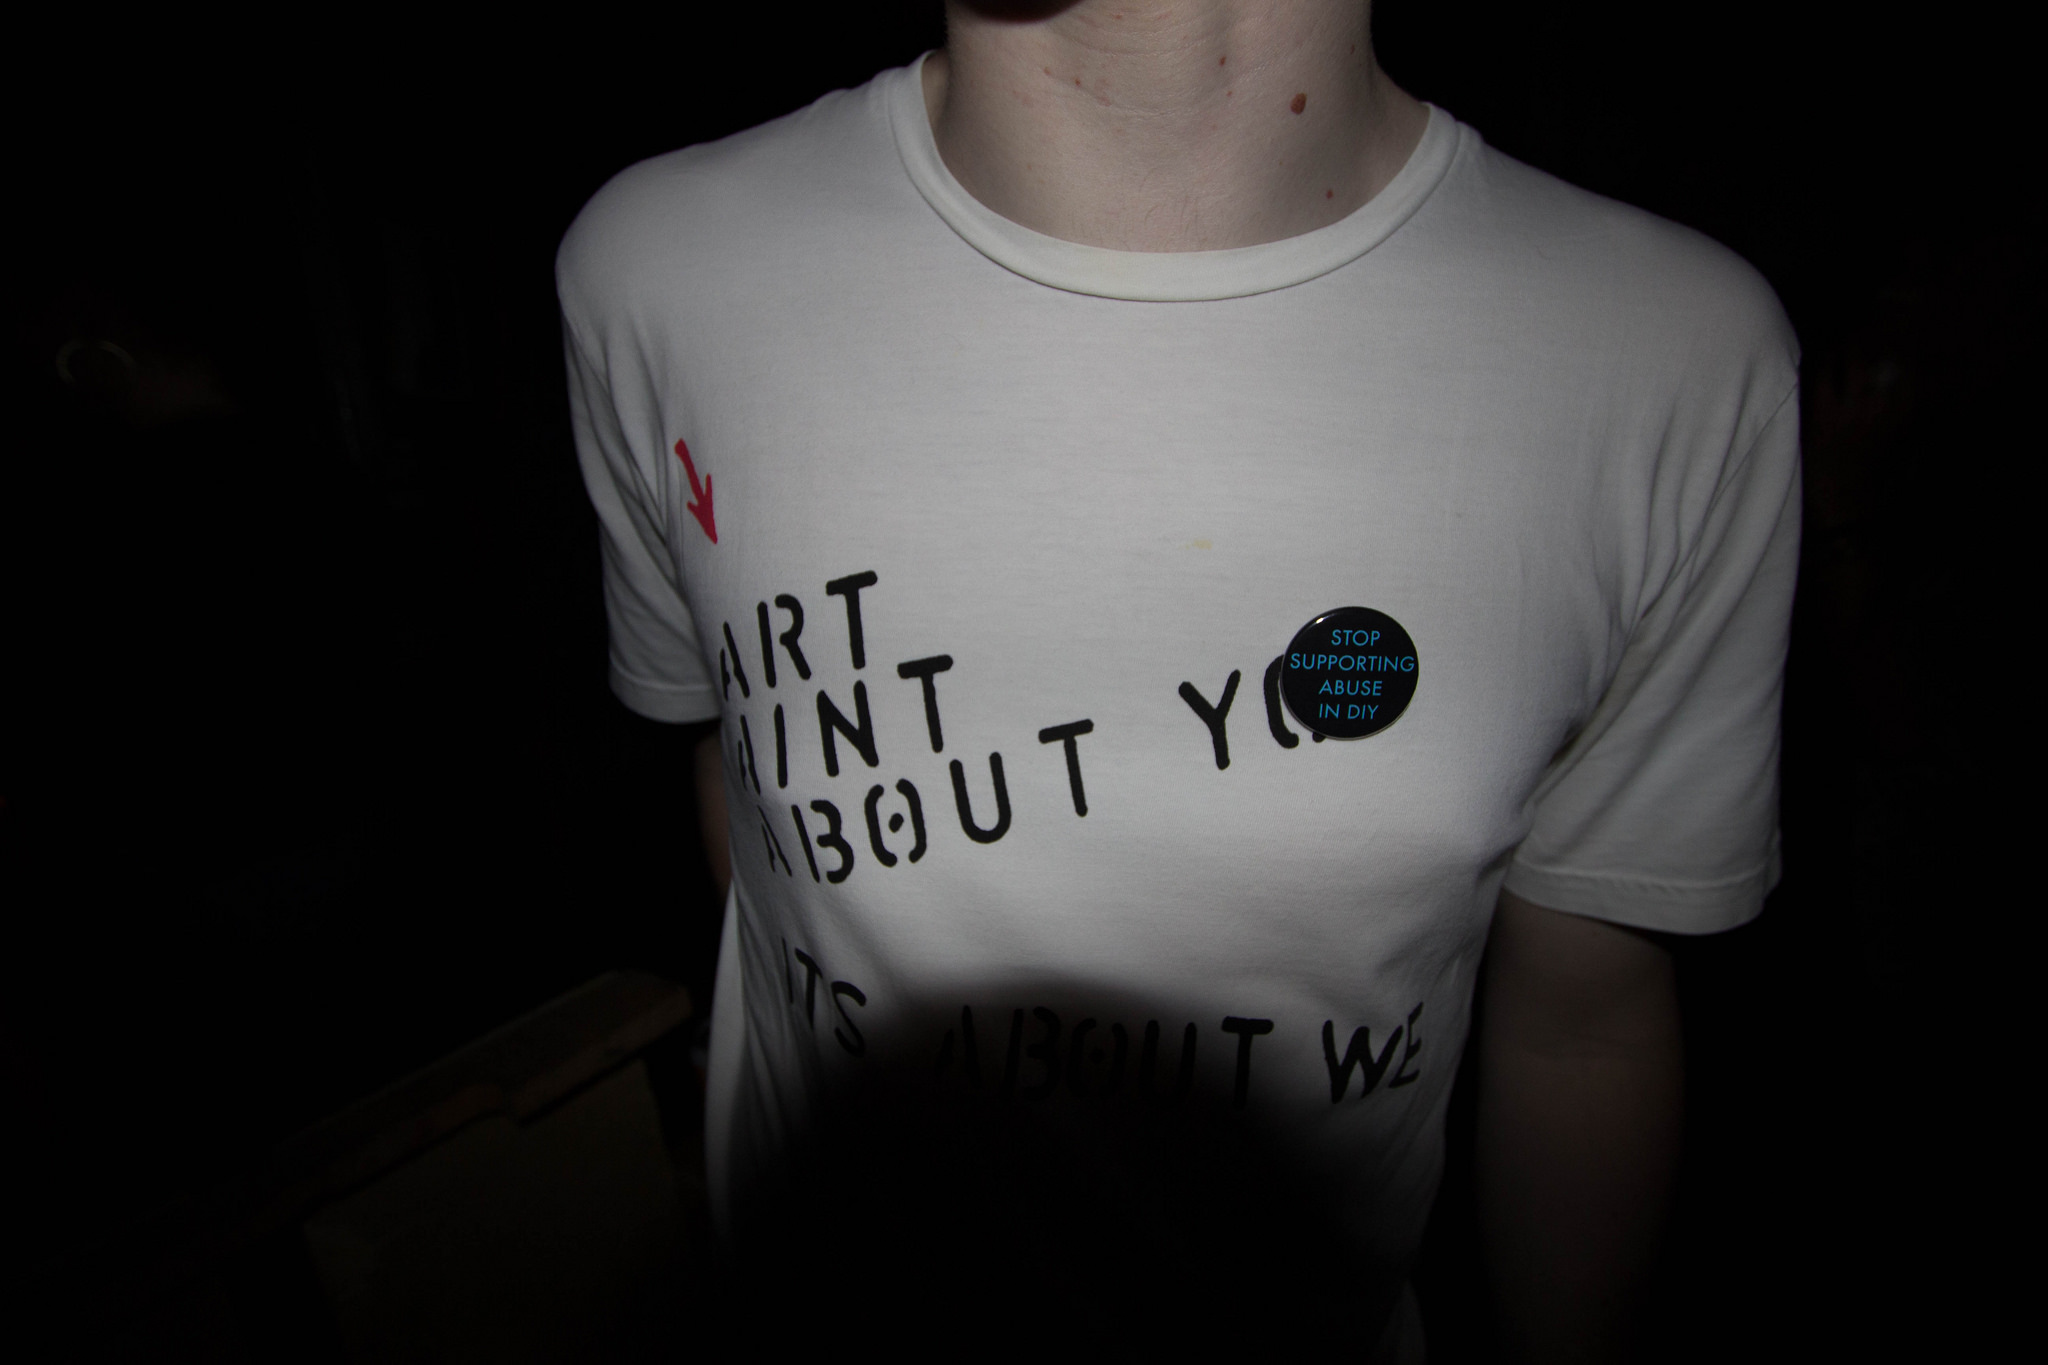 Stop supporting abuse in DIY button